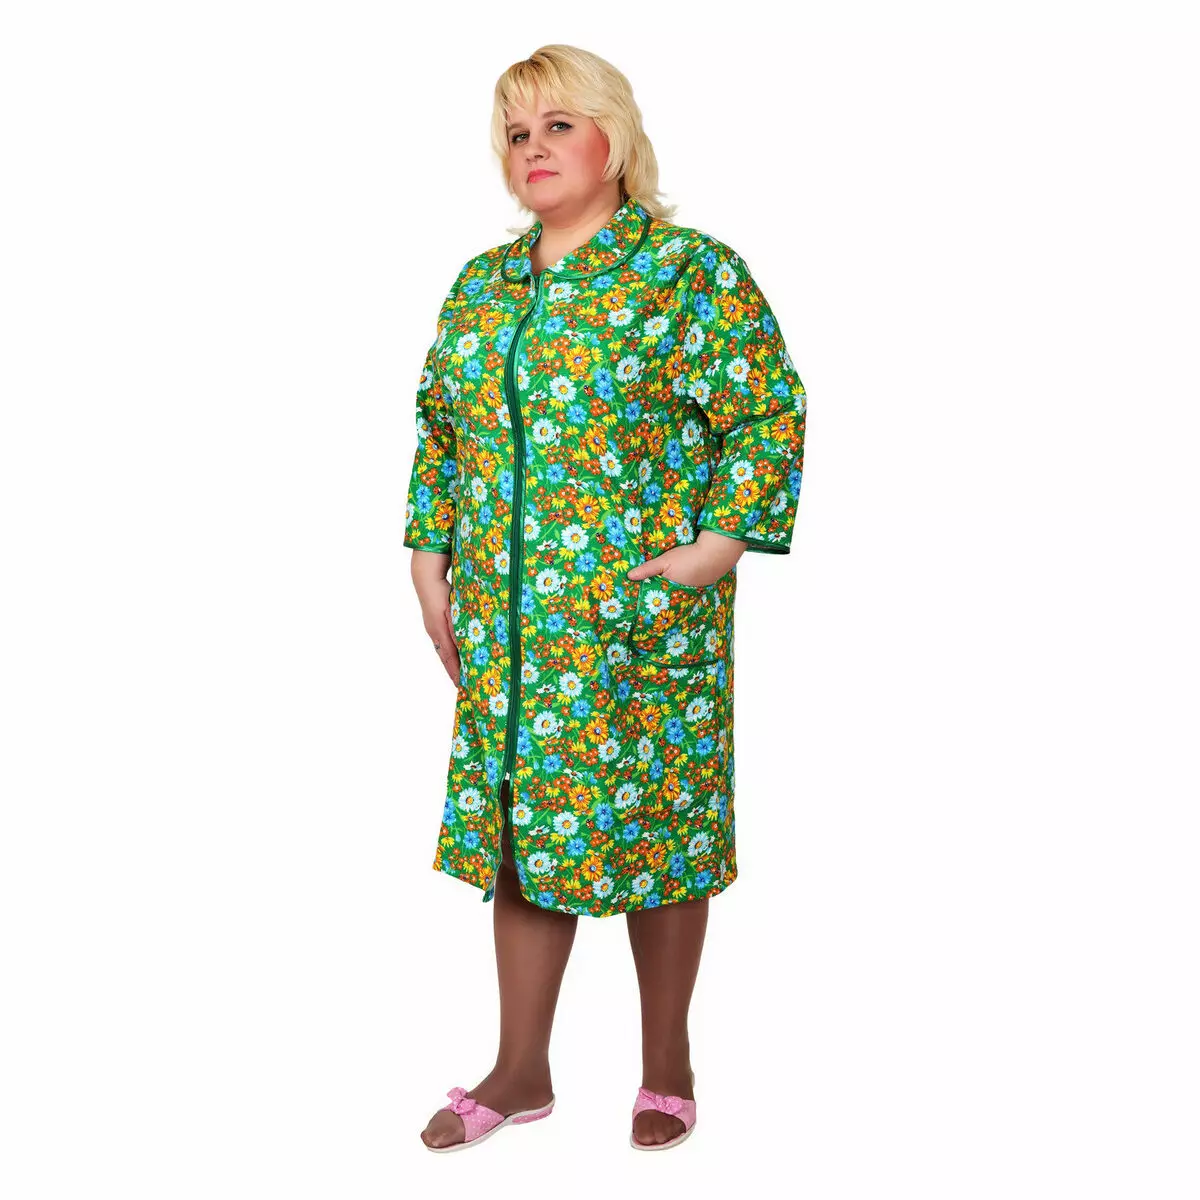 Flannel robe 45 photos: Women's bathrobes from flannels with odor, on buttons, large sizes 1633_35